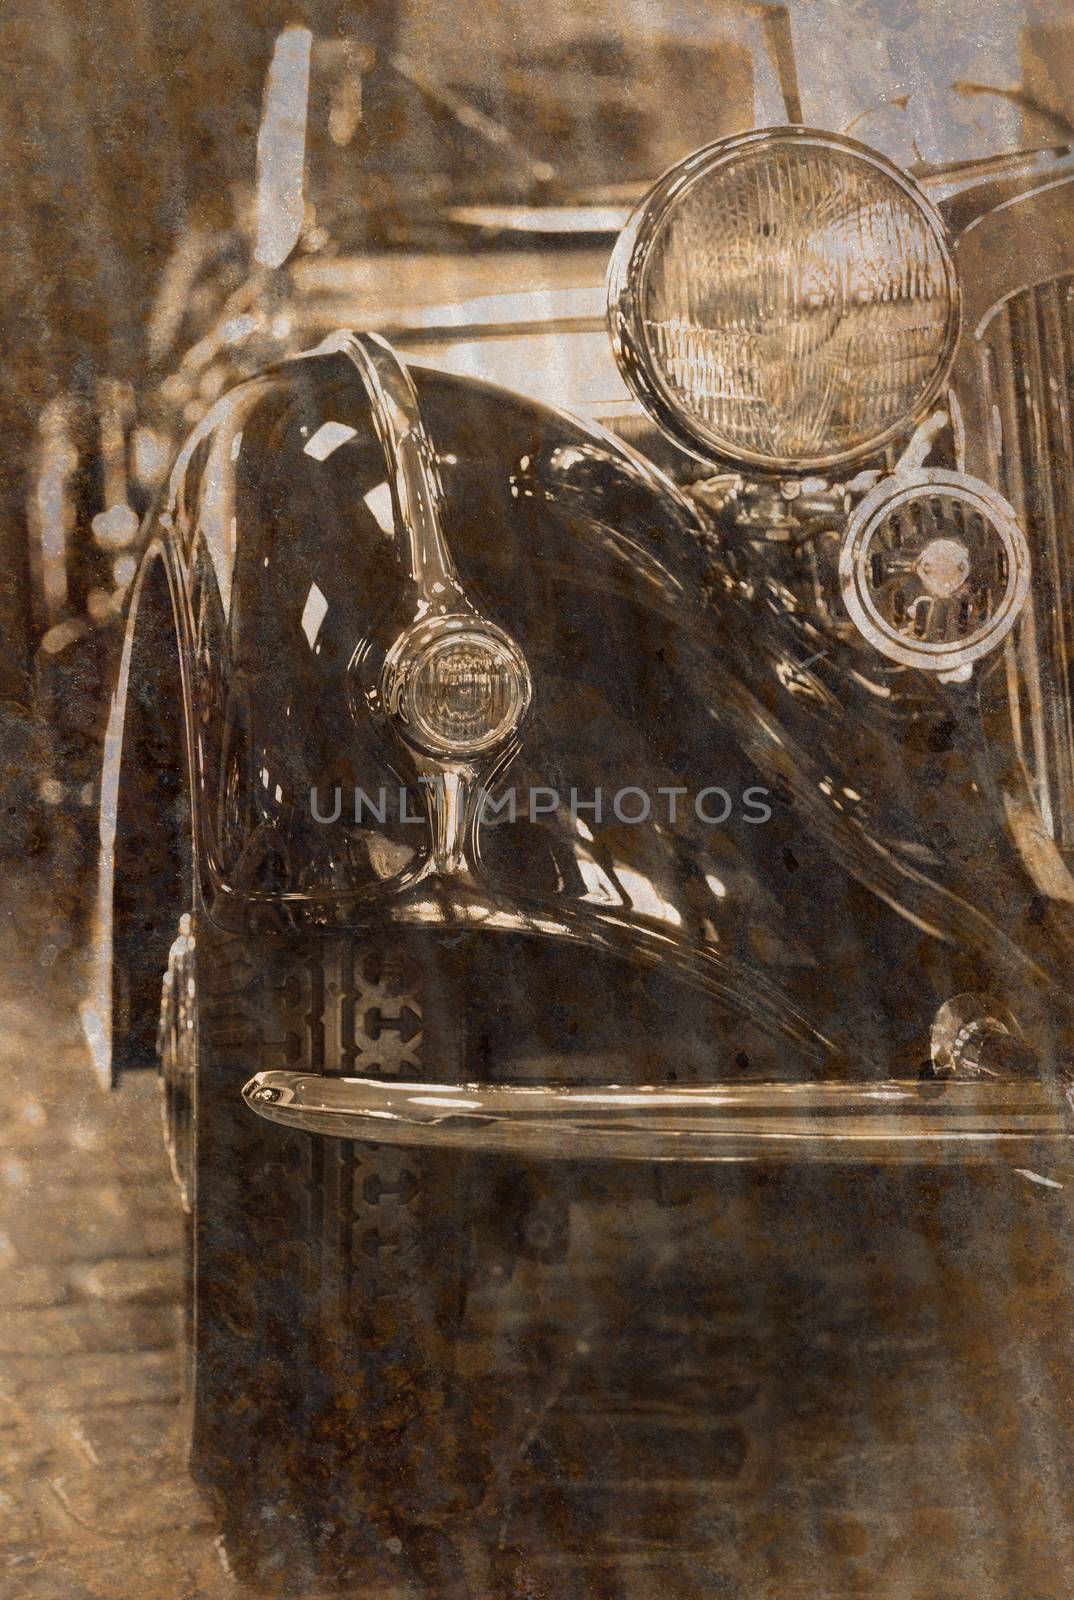 part of a vintage old car, noise added intentionally, editorial use only